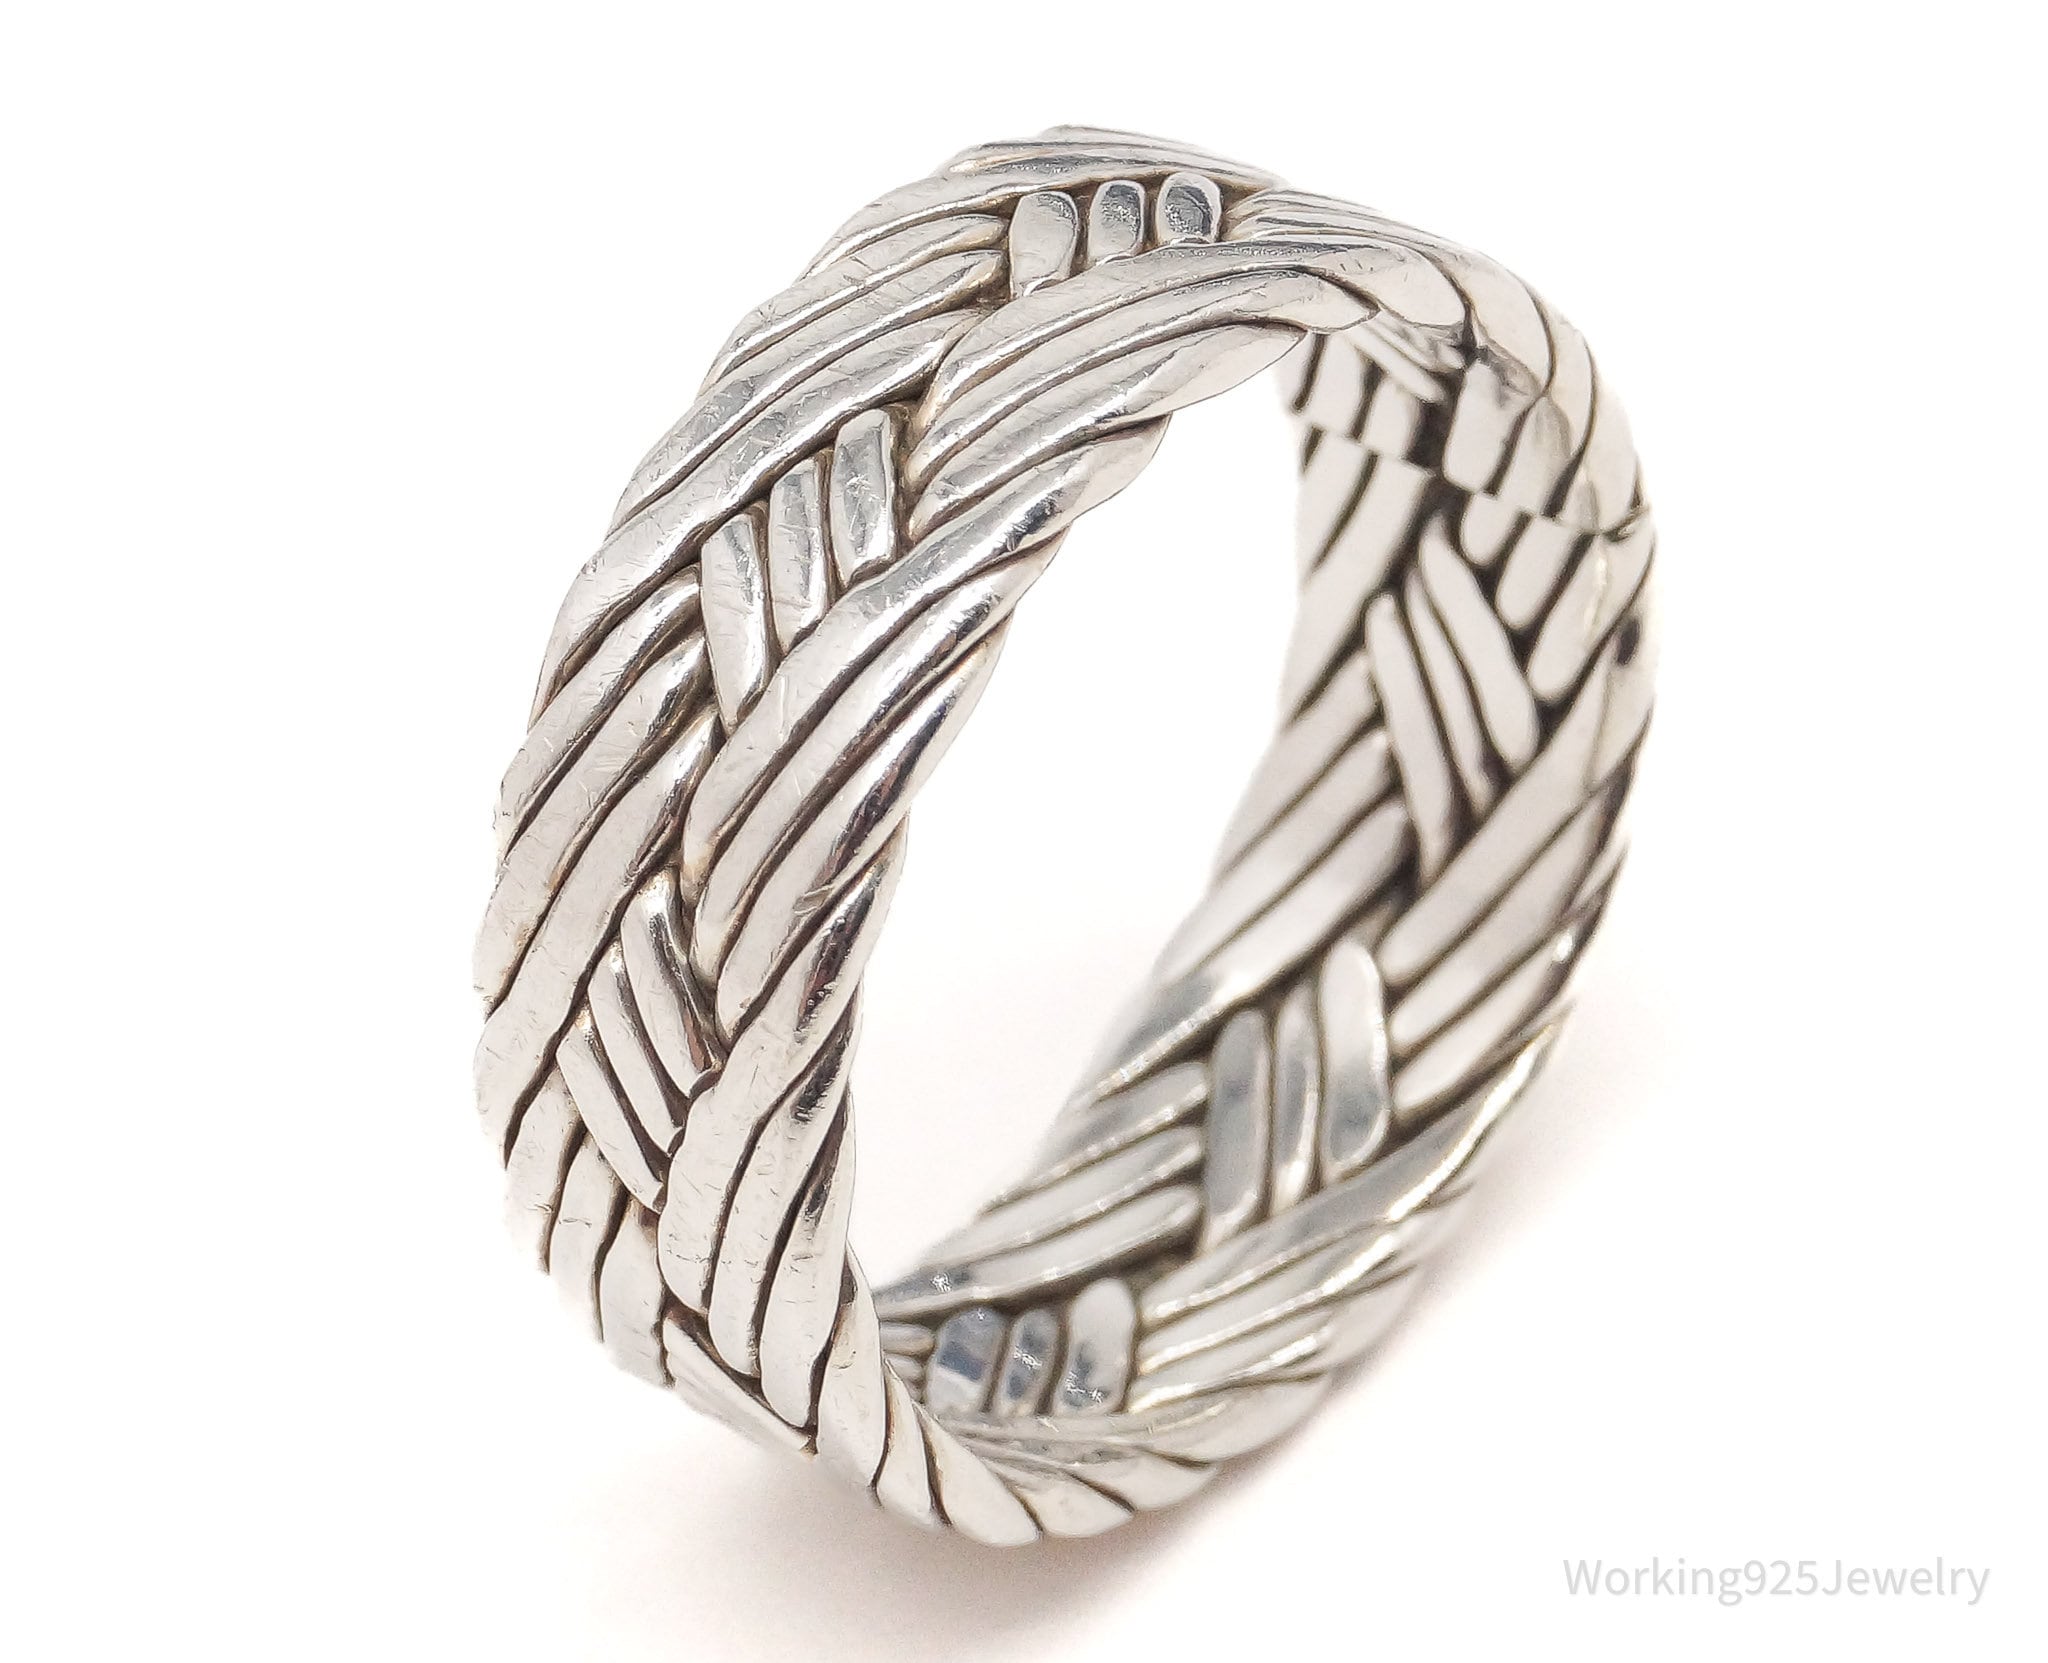 Vintage Weave Rope Braid Sterling Silver Band Ring - Size 11